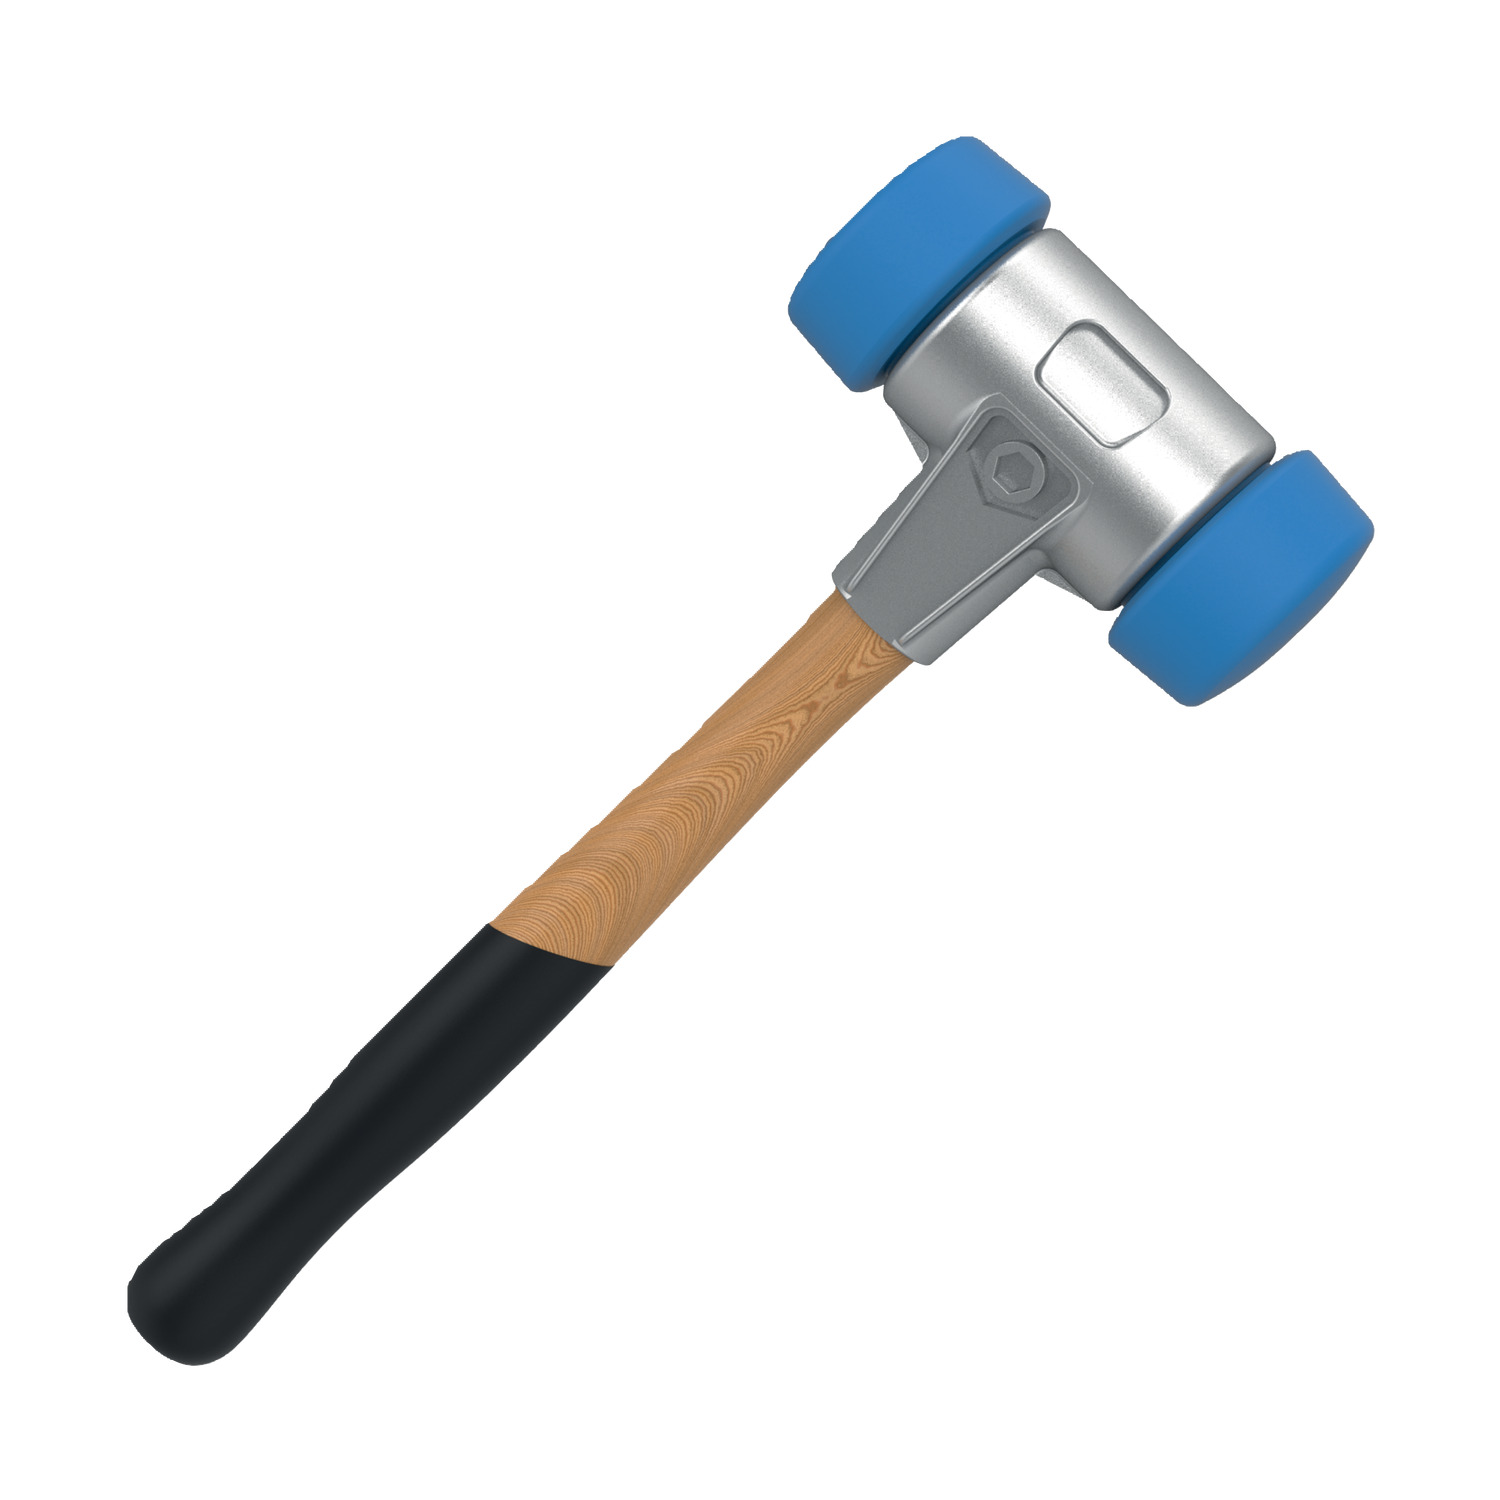 Product 98021, Simplex Mallets - Complete light alloy housing - wooden handle / 